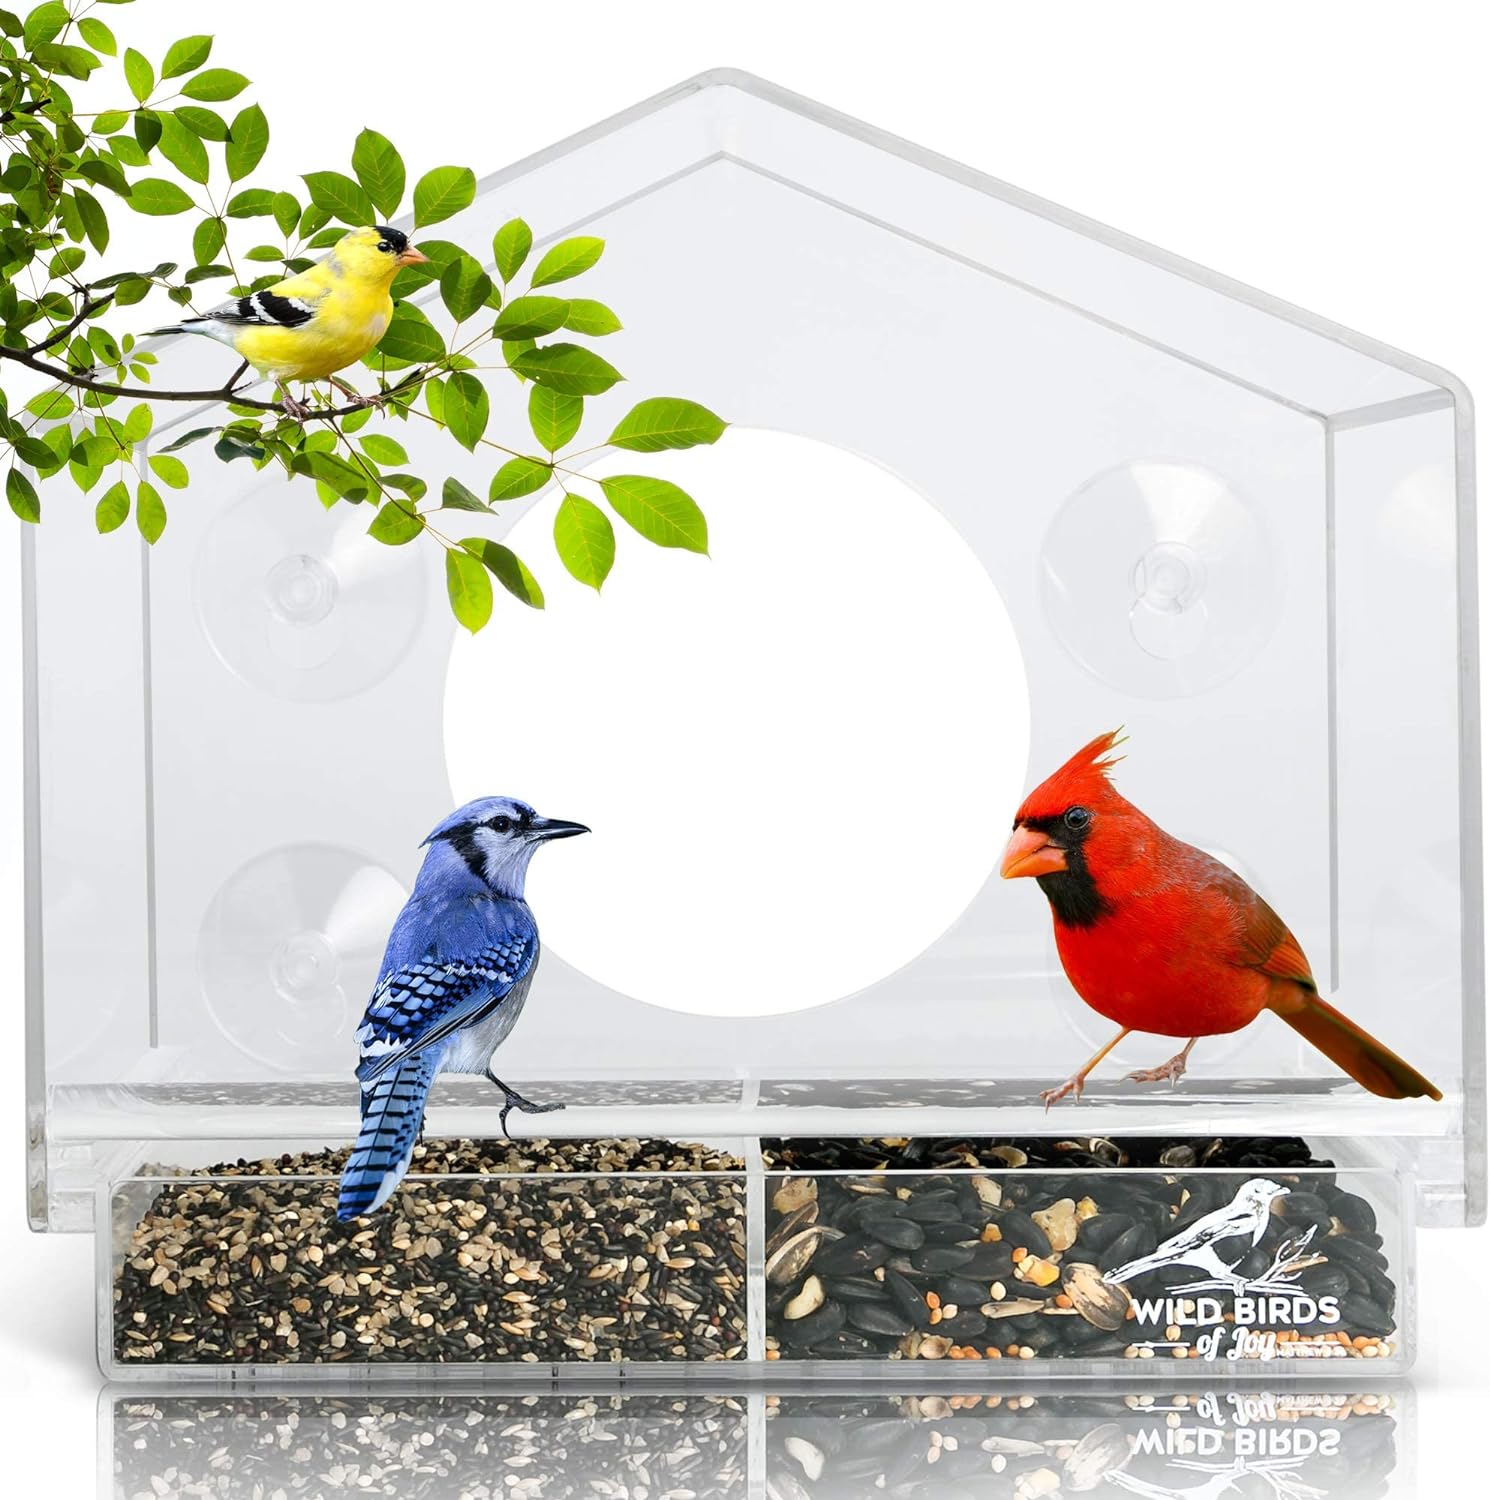 online contests, sweepstakes and giveaways - Giveaway - Win a Window Bird Feeder!